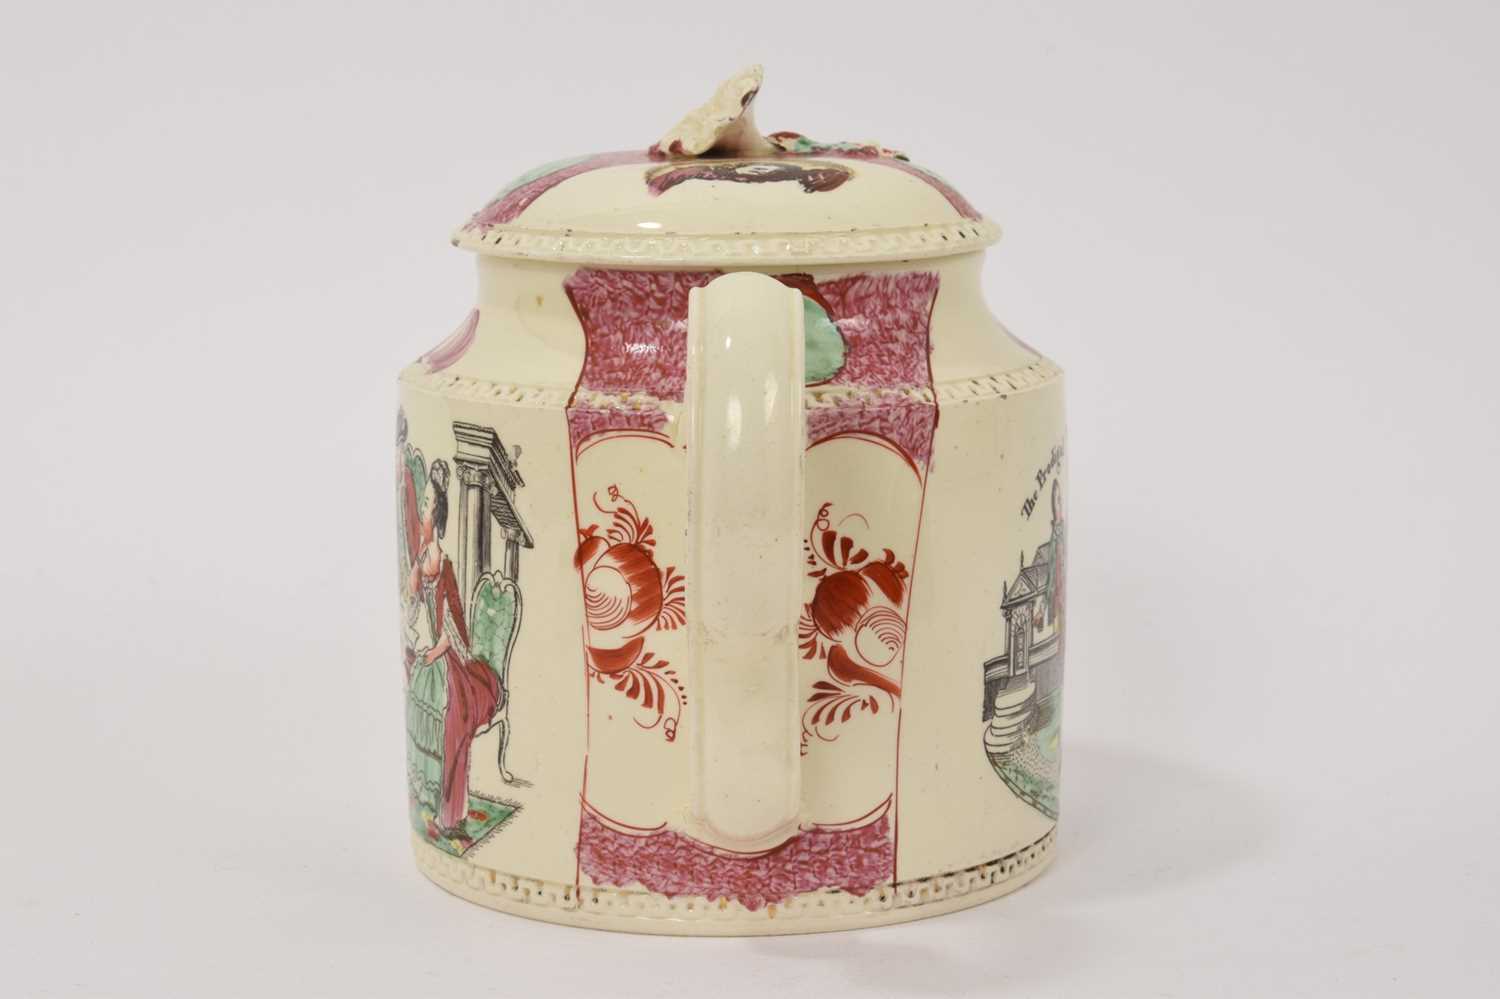 18th century creamware teapot by William Greatbatch - The prodigal son taking leave - Image 4 of 8